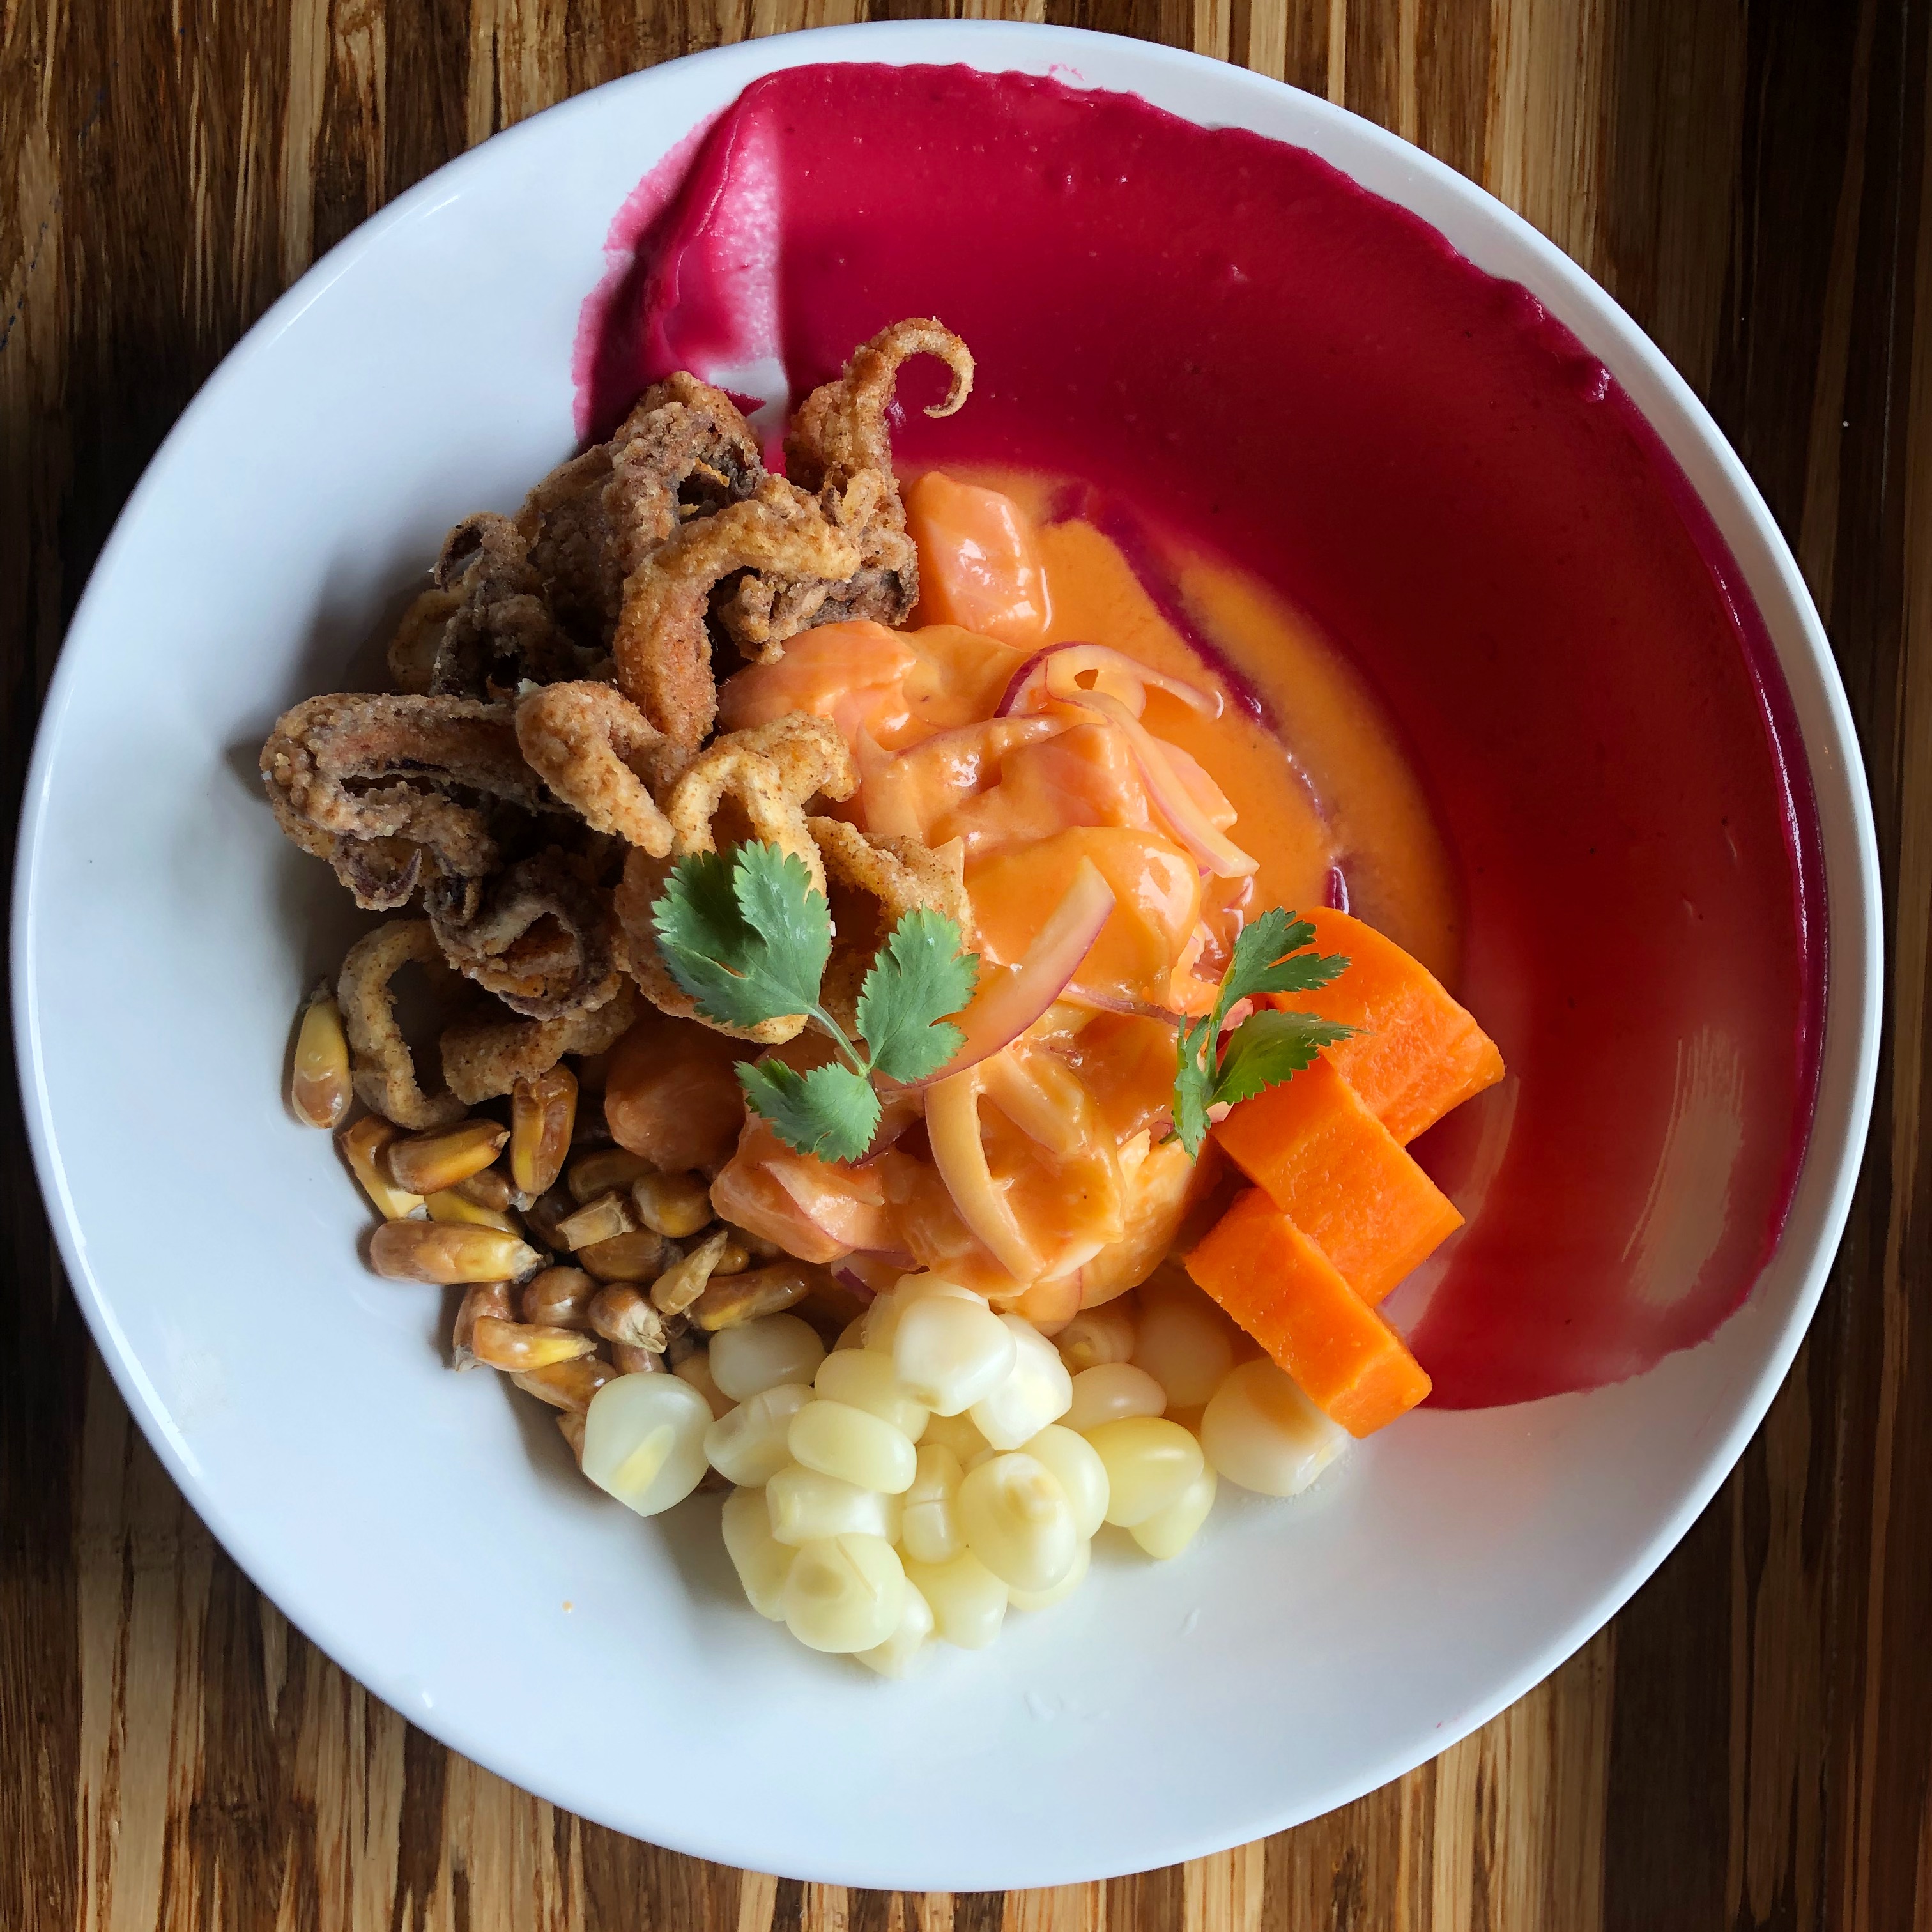 A bowl of ceviche with hunks of raw fish, sweet potato, corn, and just a touch of fried calamari.